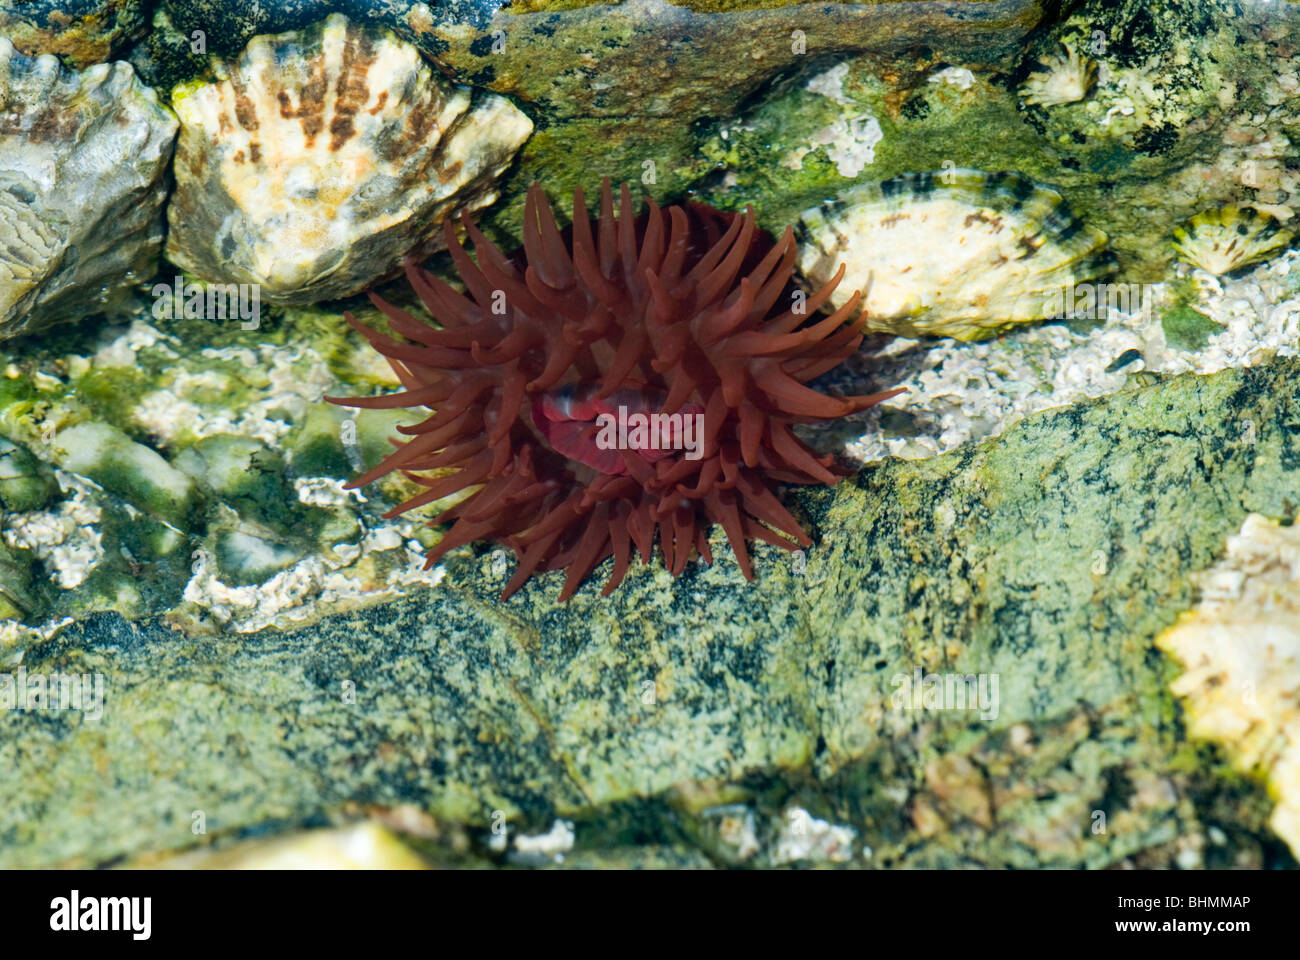 Beadlet Anemone (Actinia equina) and Common limpet Stock Photo